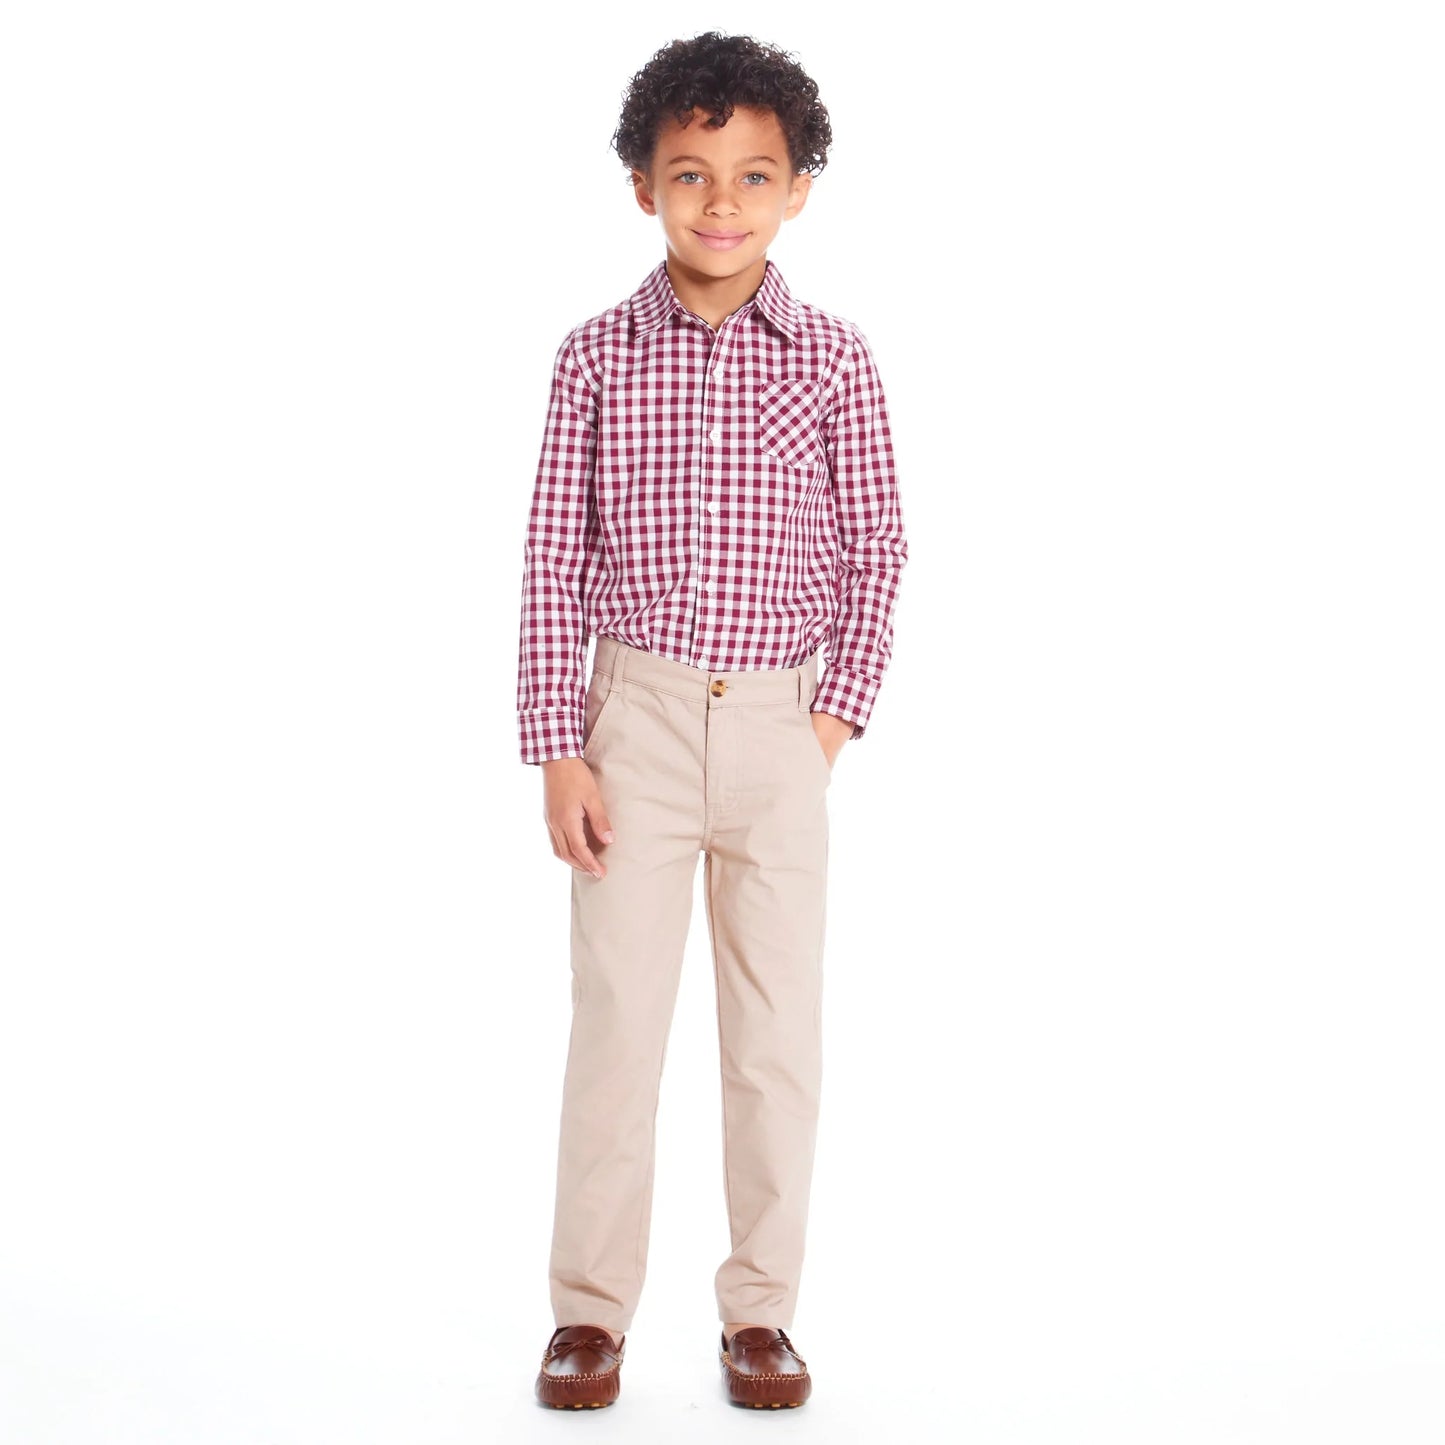 Boys Red Gingham Button Down